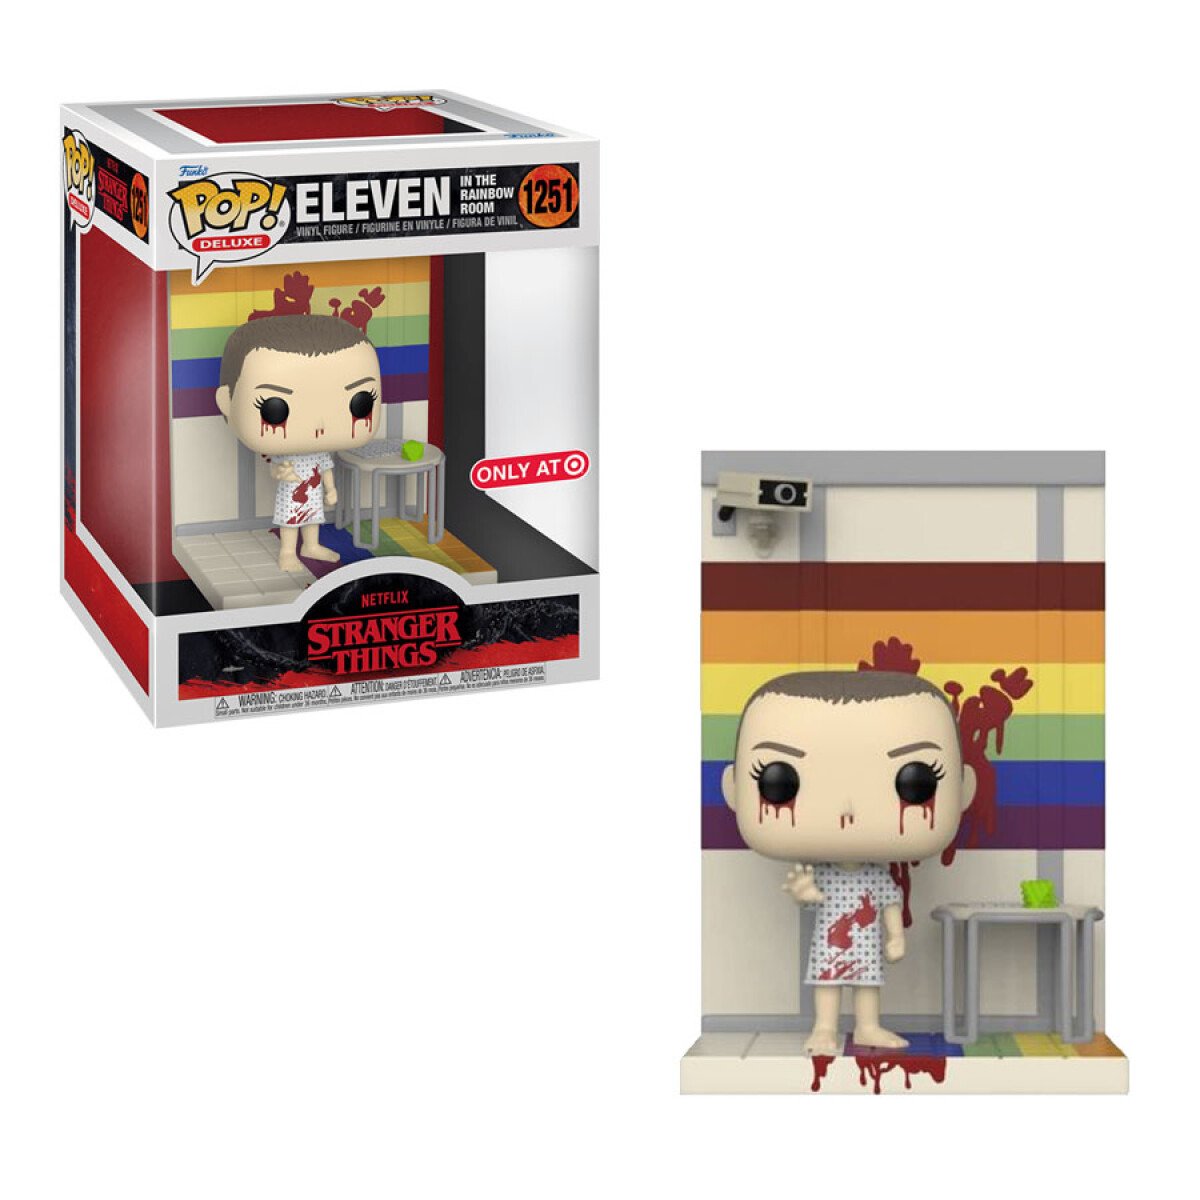 Eleven in the Rainbow Room • Stranger Things [Exclusivo] - 1251 